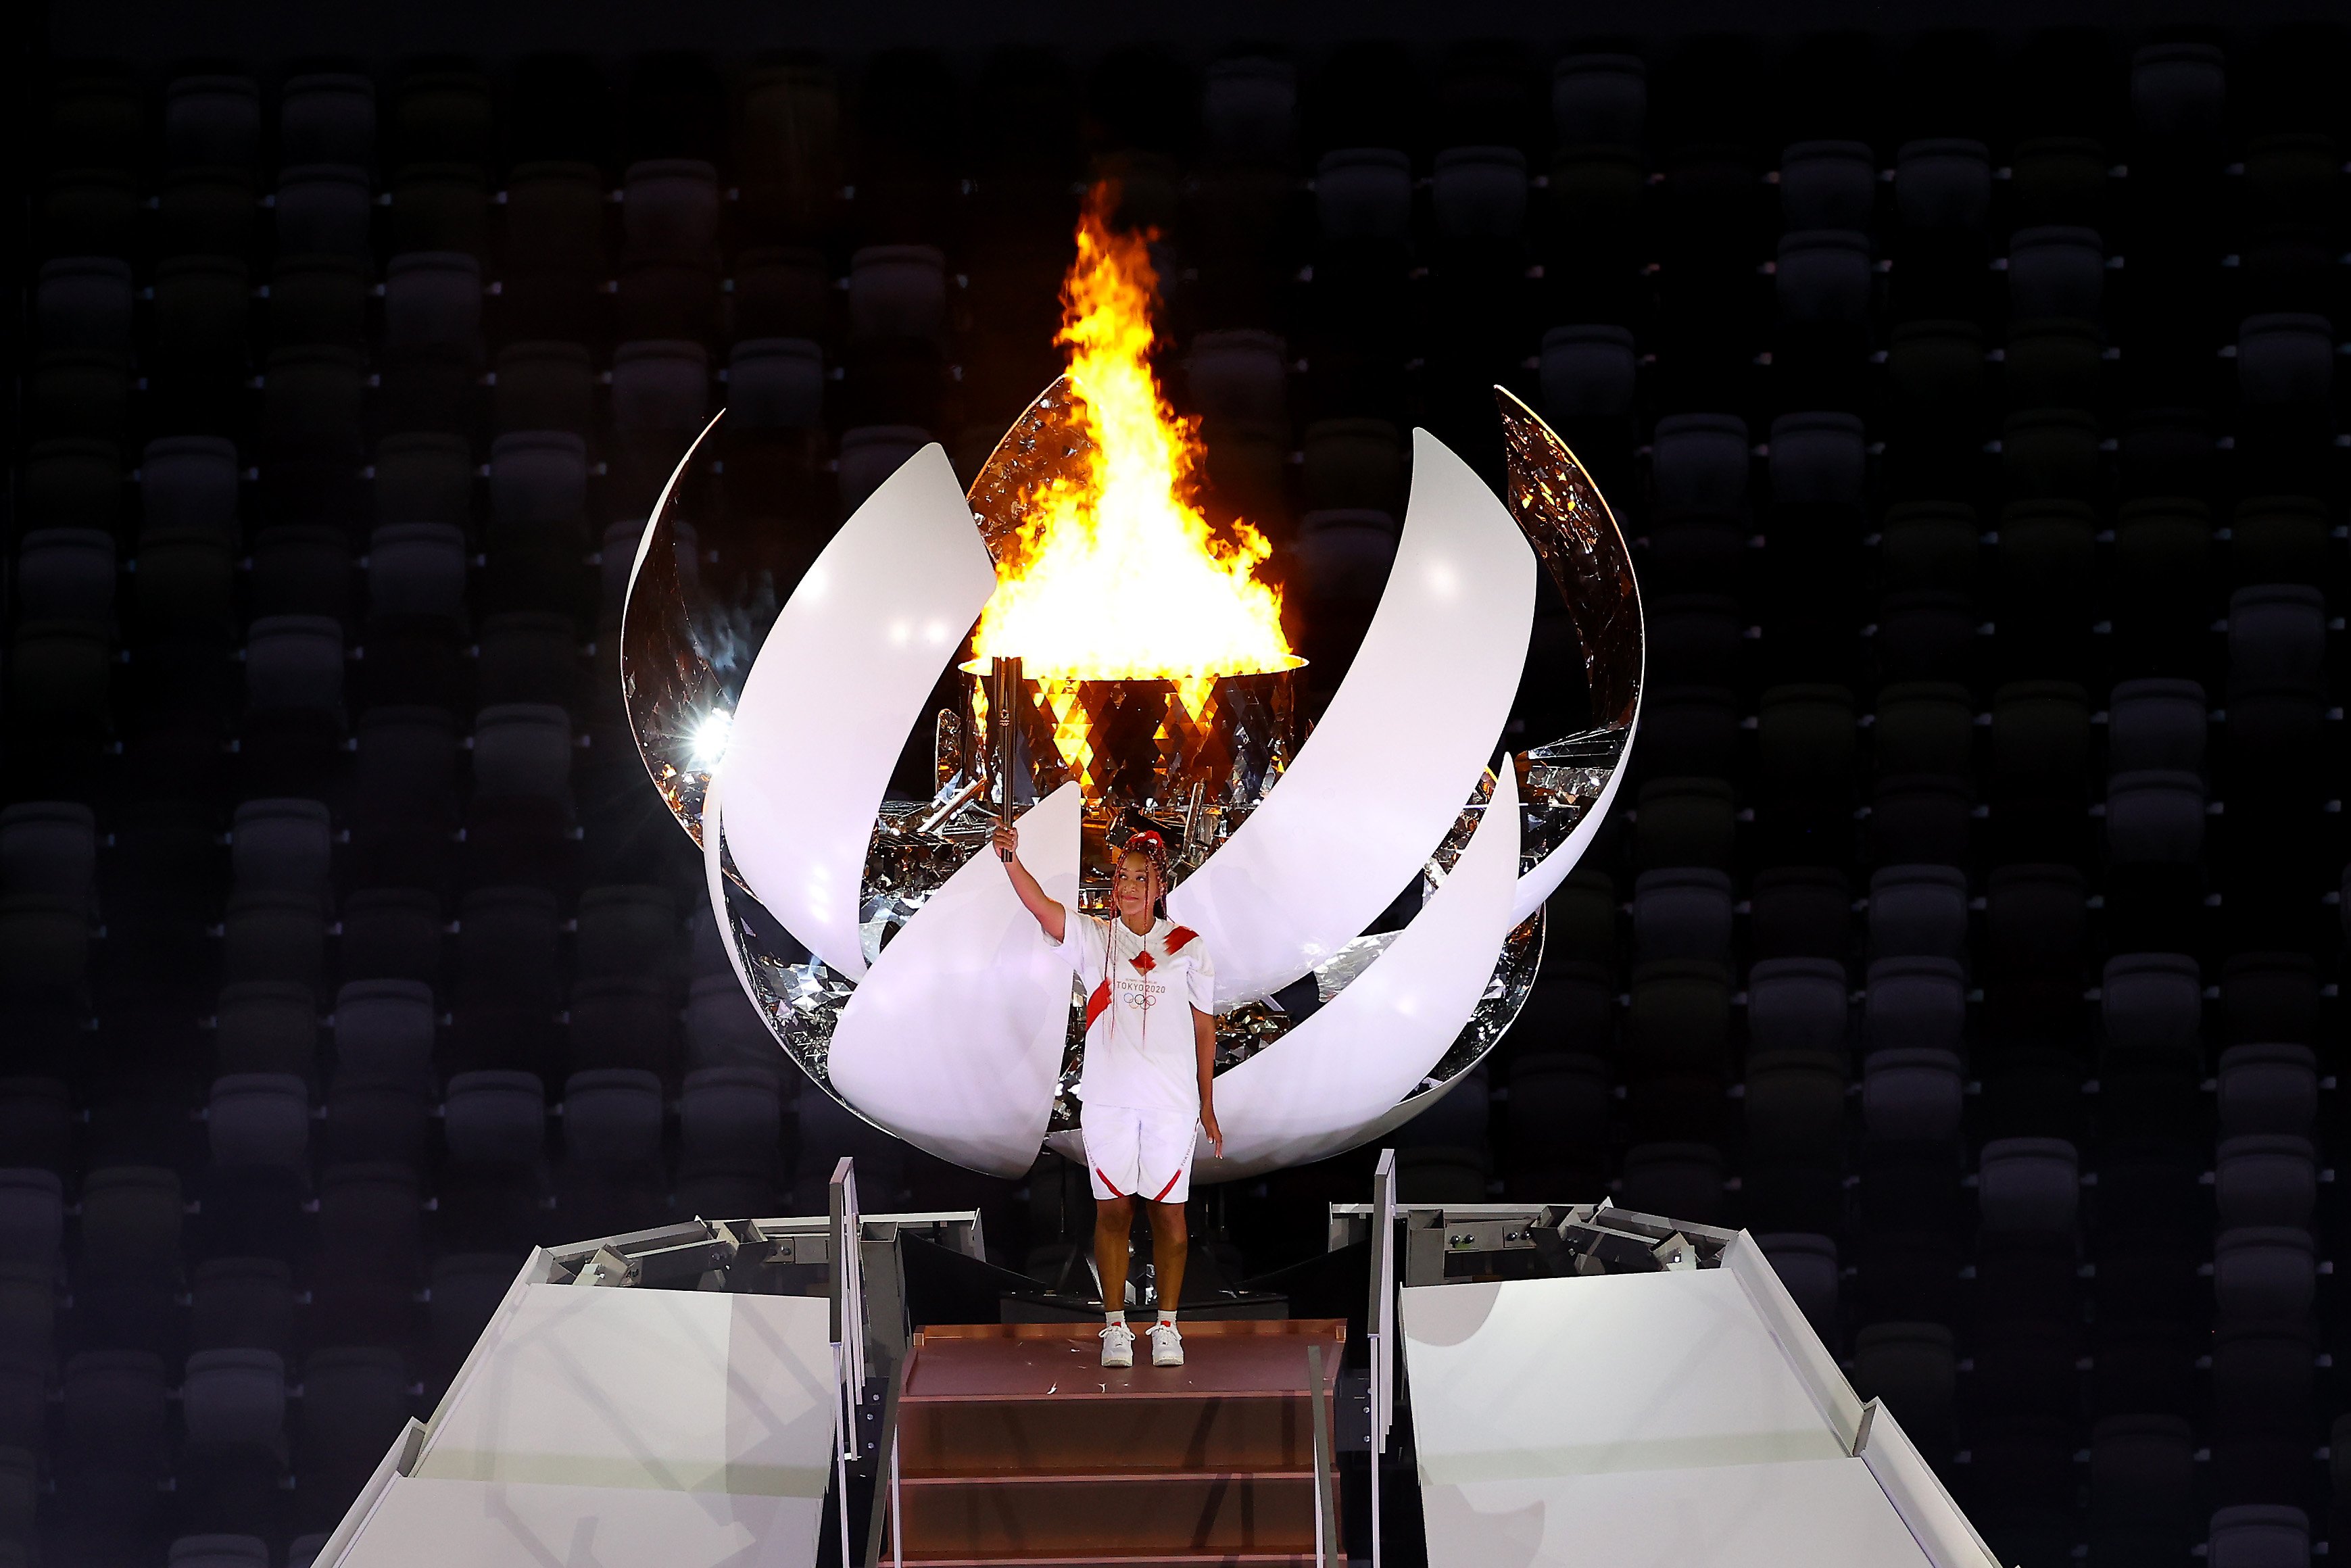 Why the Opening Ceremonies at the 2022 Winter Olympic Games Were an  Artless, Uninspired Dud